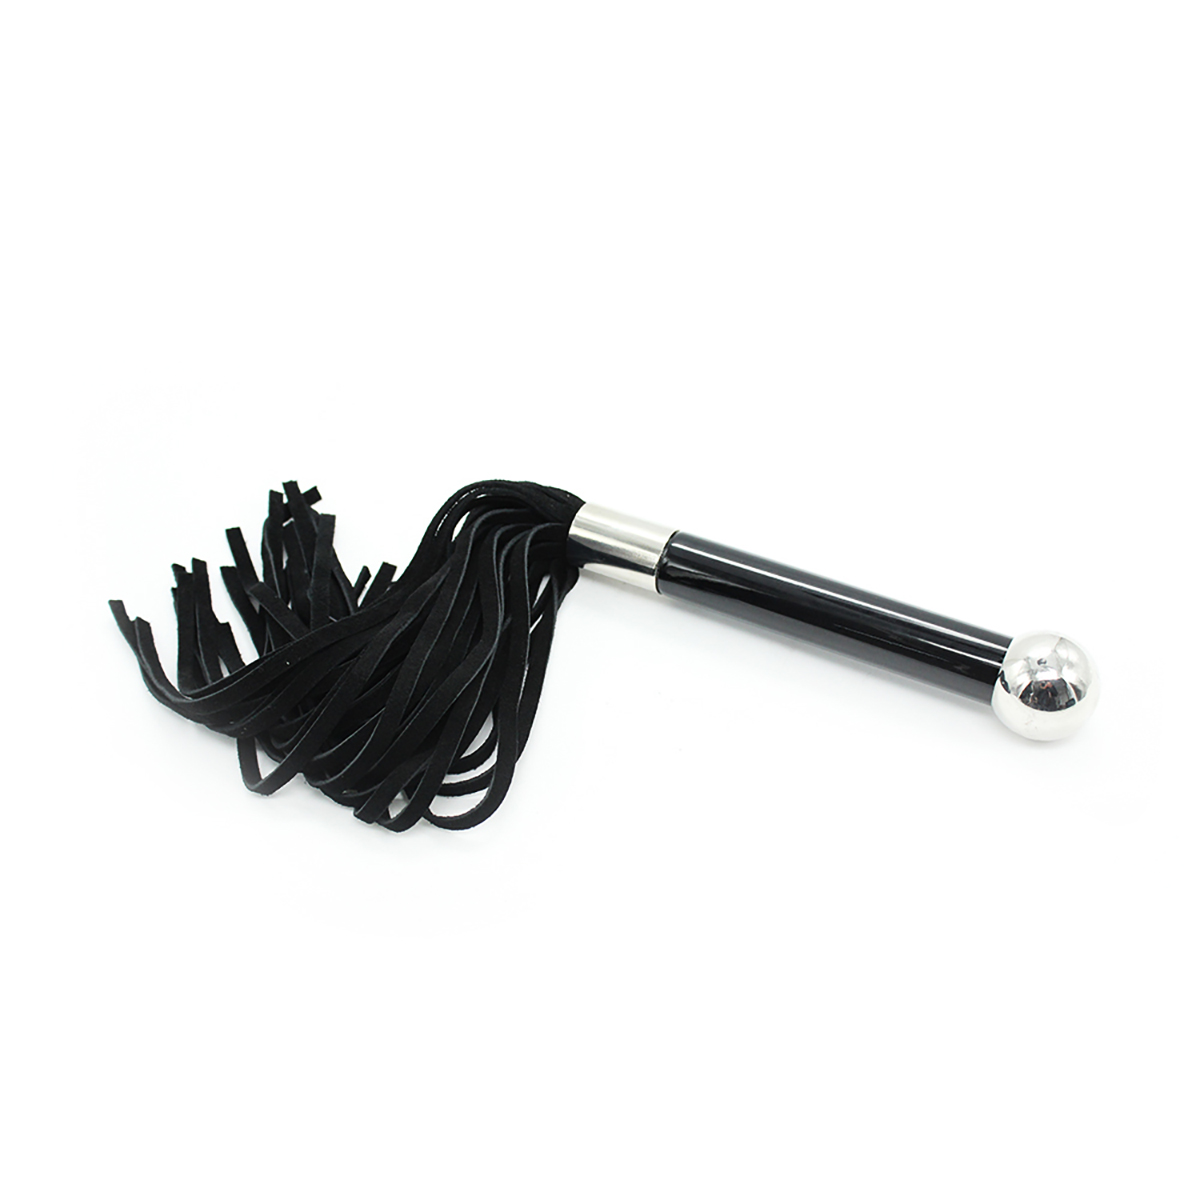 Black-Flogger-With-Acrylic-Handle-OPR-321105-2